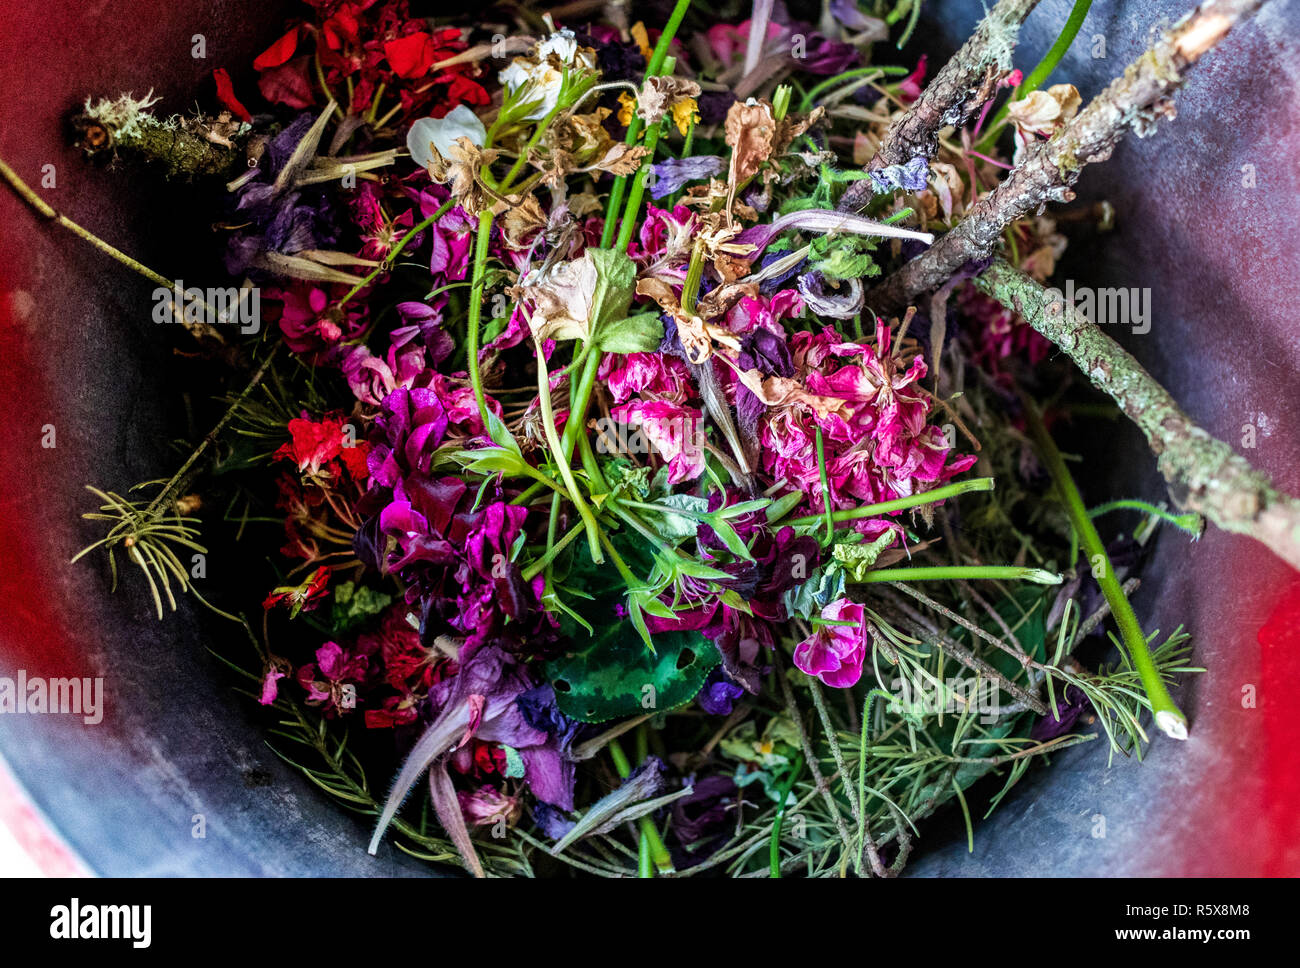 Waste bin full of garden clippings and various plant parts Stock Photo